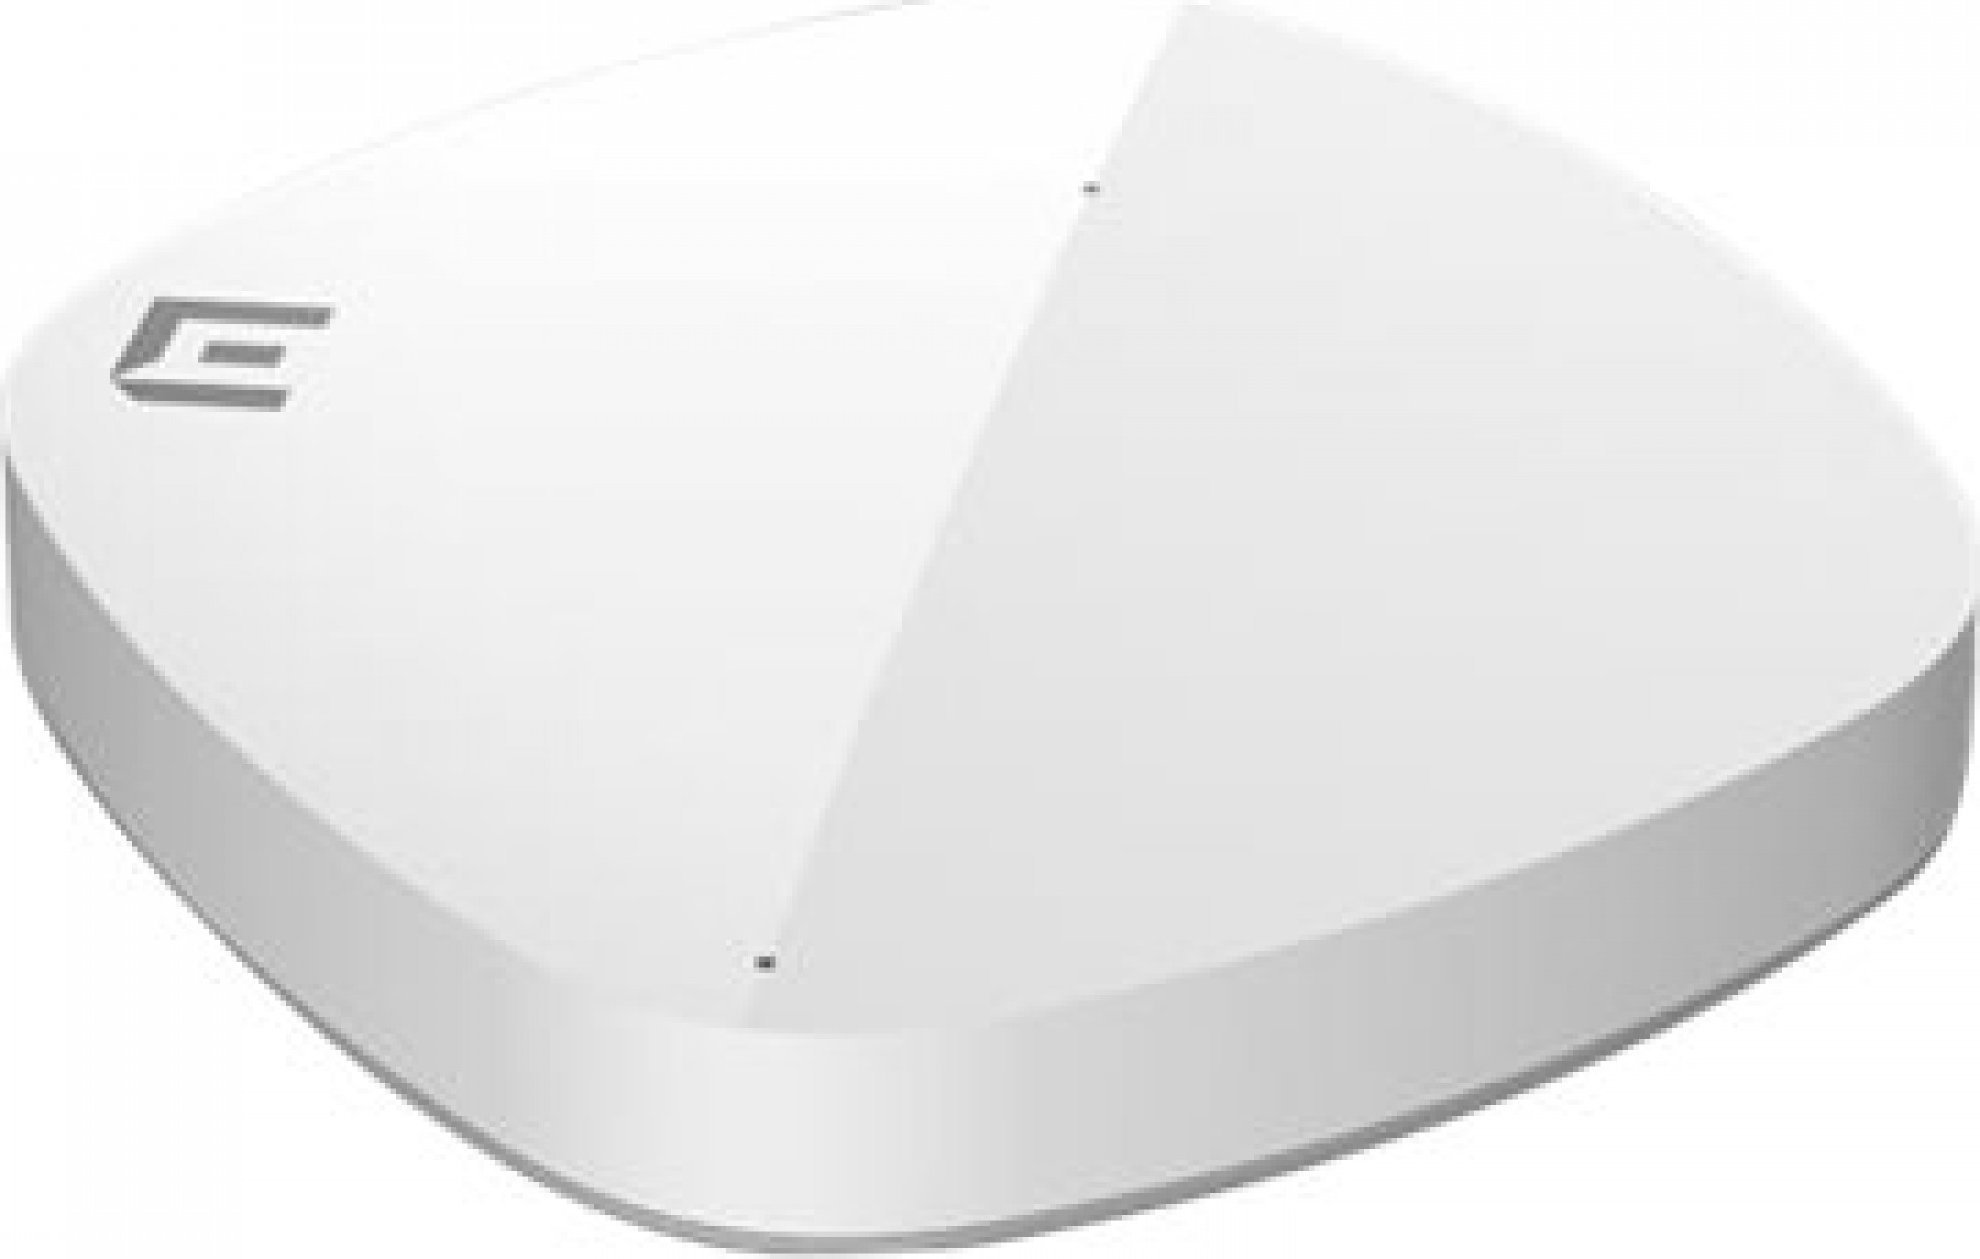 Access Point Extreme Networks AP410C-1-WR